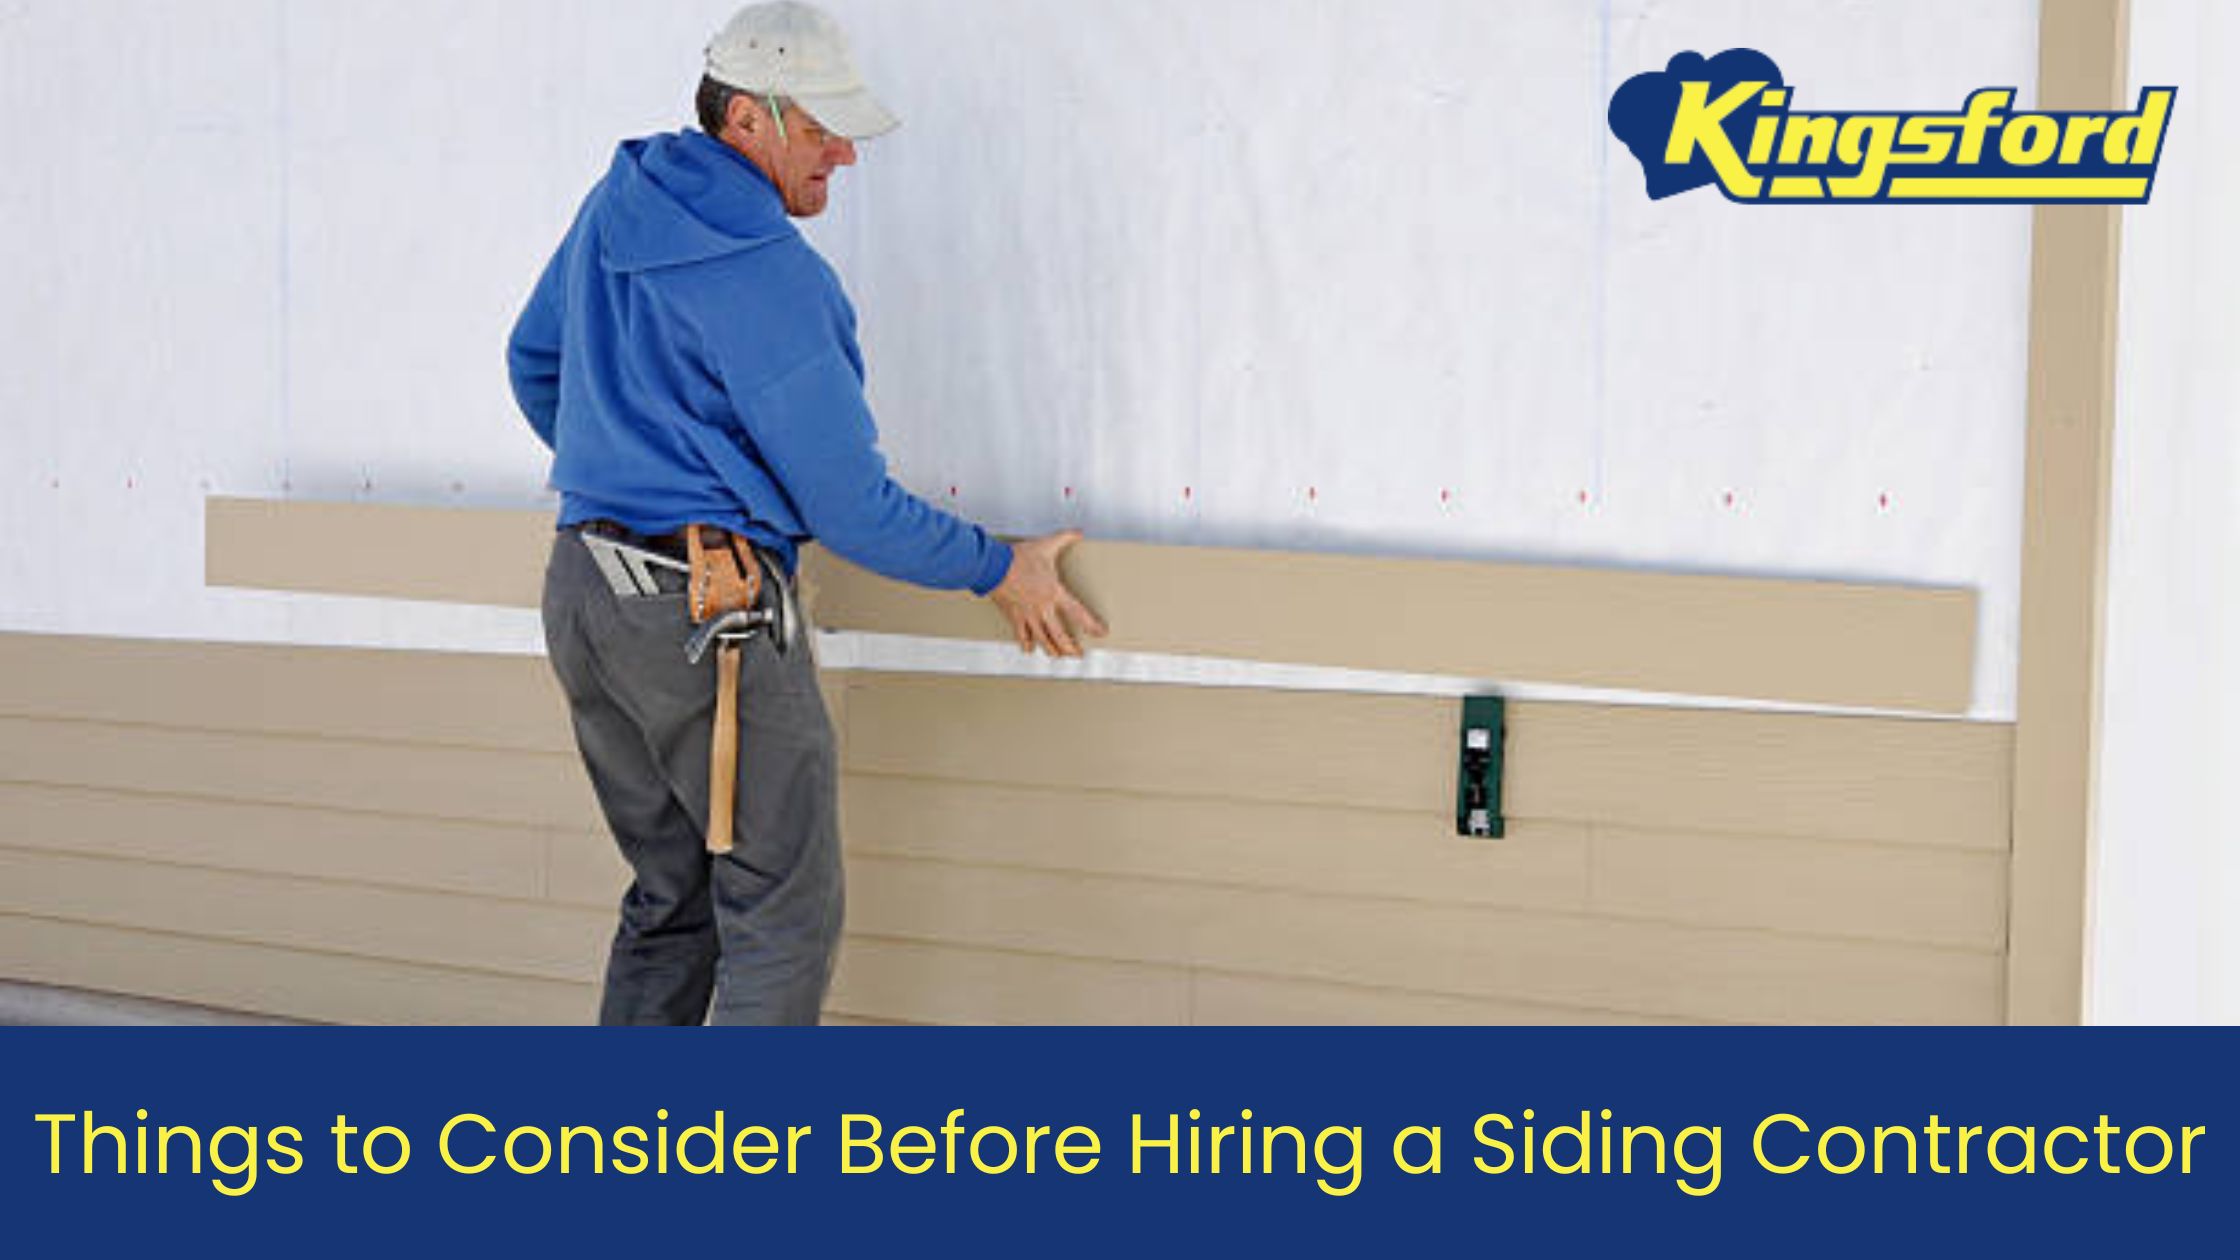 Things to Consider Before Hiring a Siding Contractor